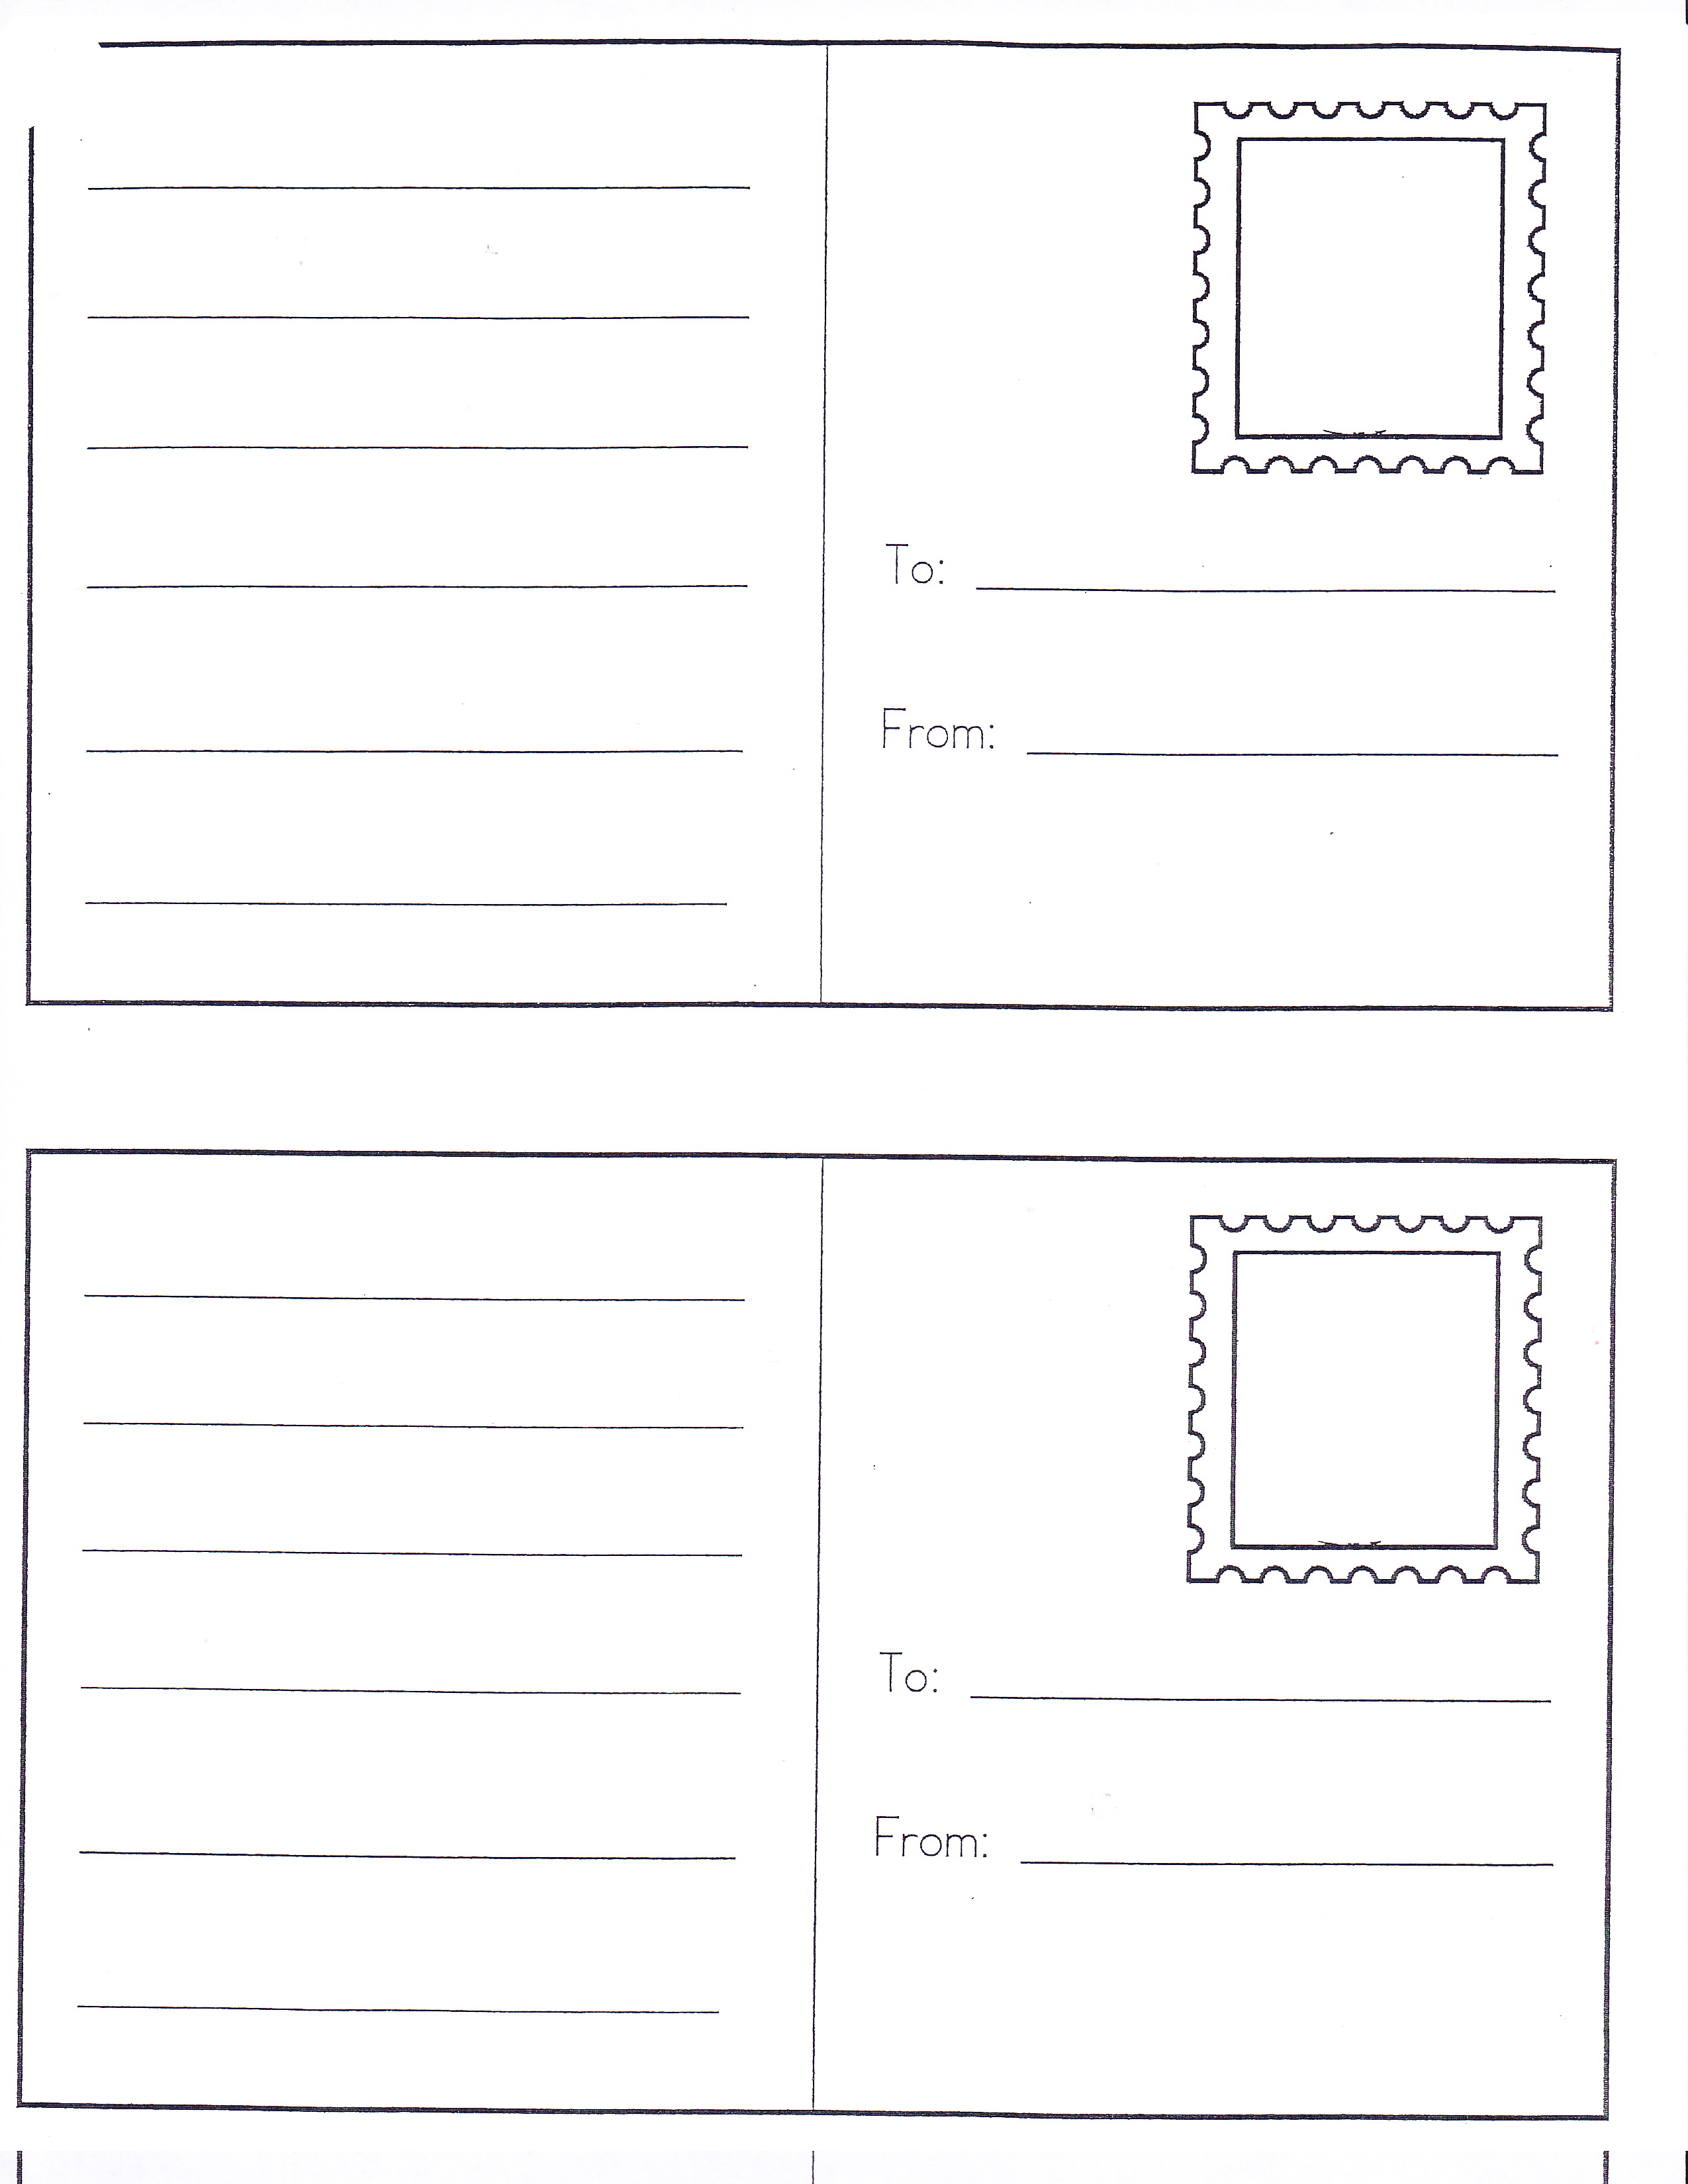 8-best-images-of-preschool-post-office-stamps-printables-postage